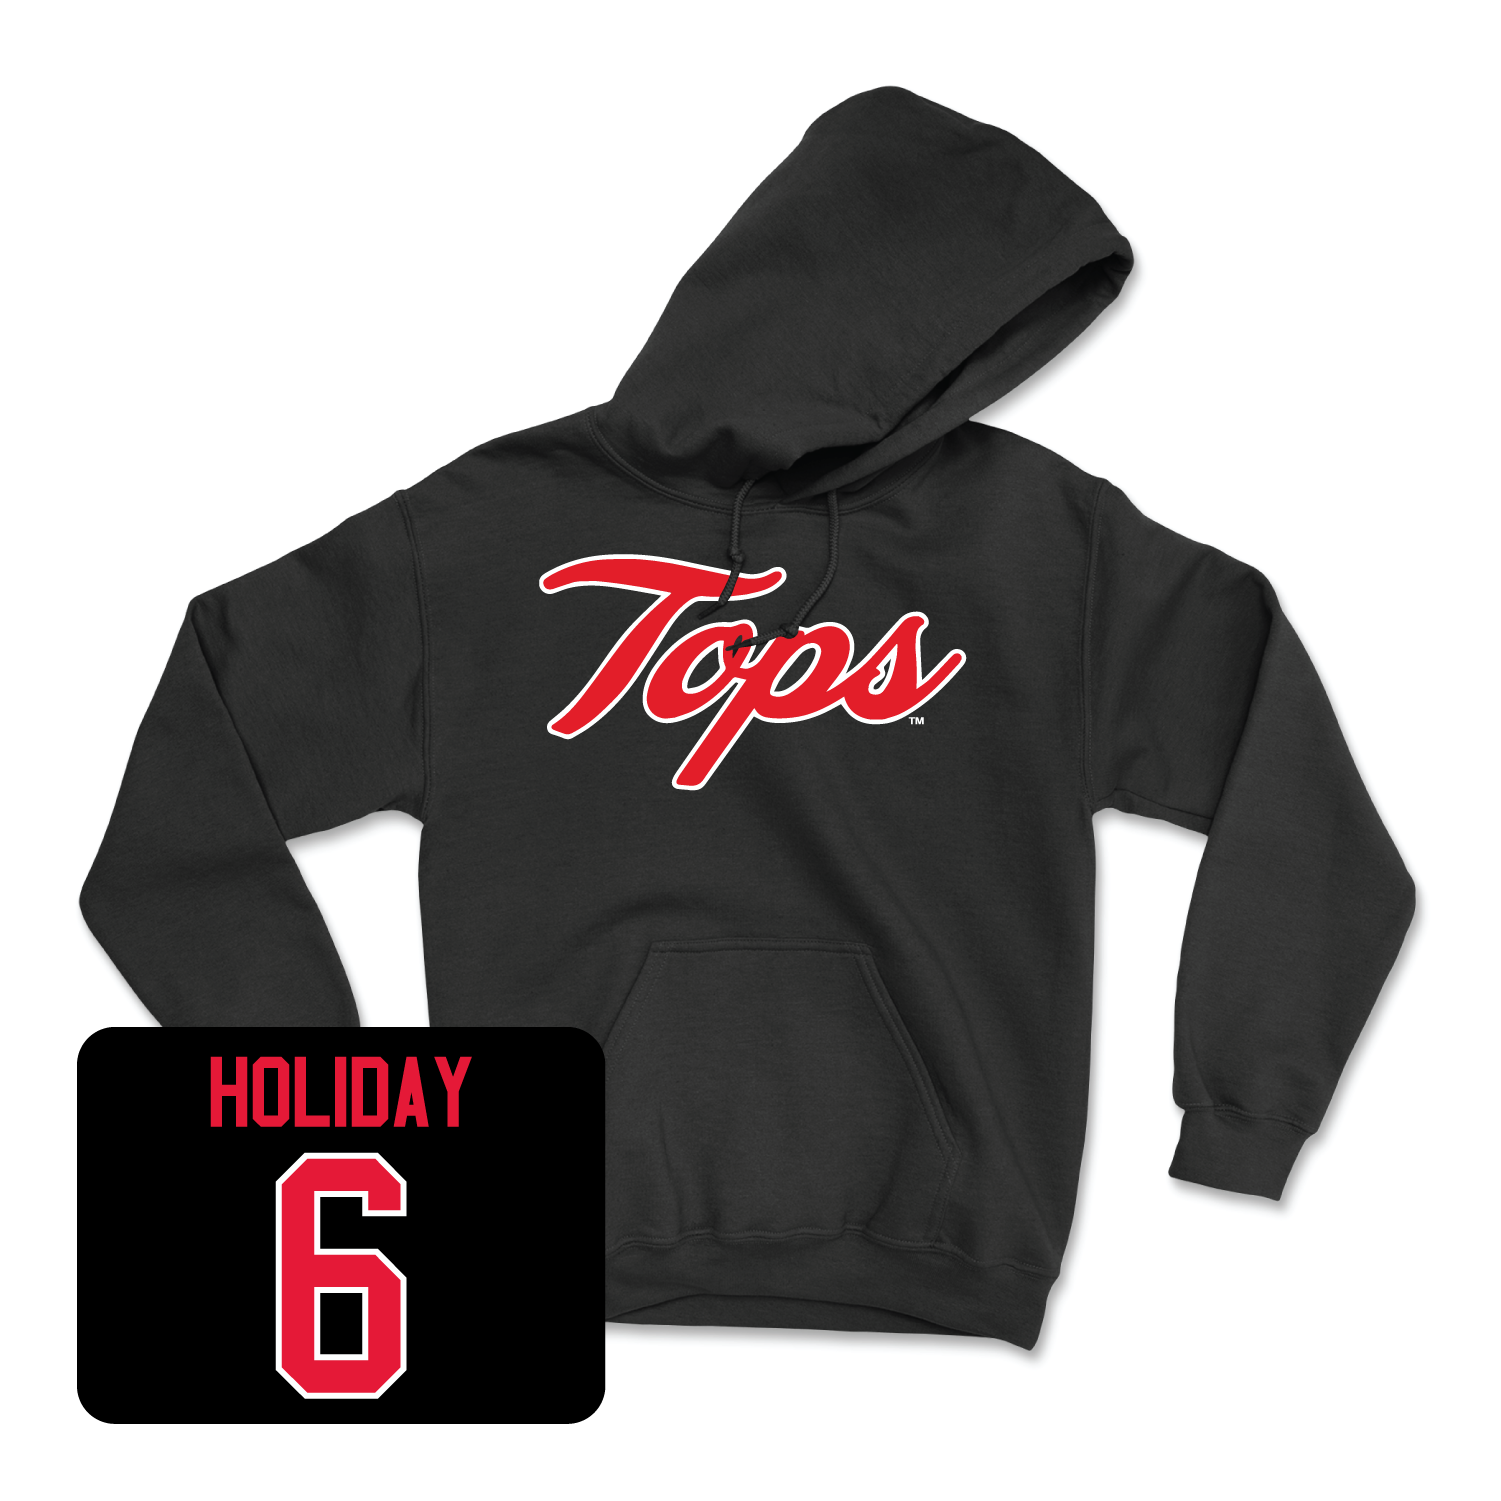 Black Football Tops Hoodie 3 X-Large / Jimmy Holiday | #6